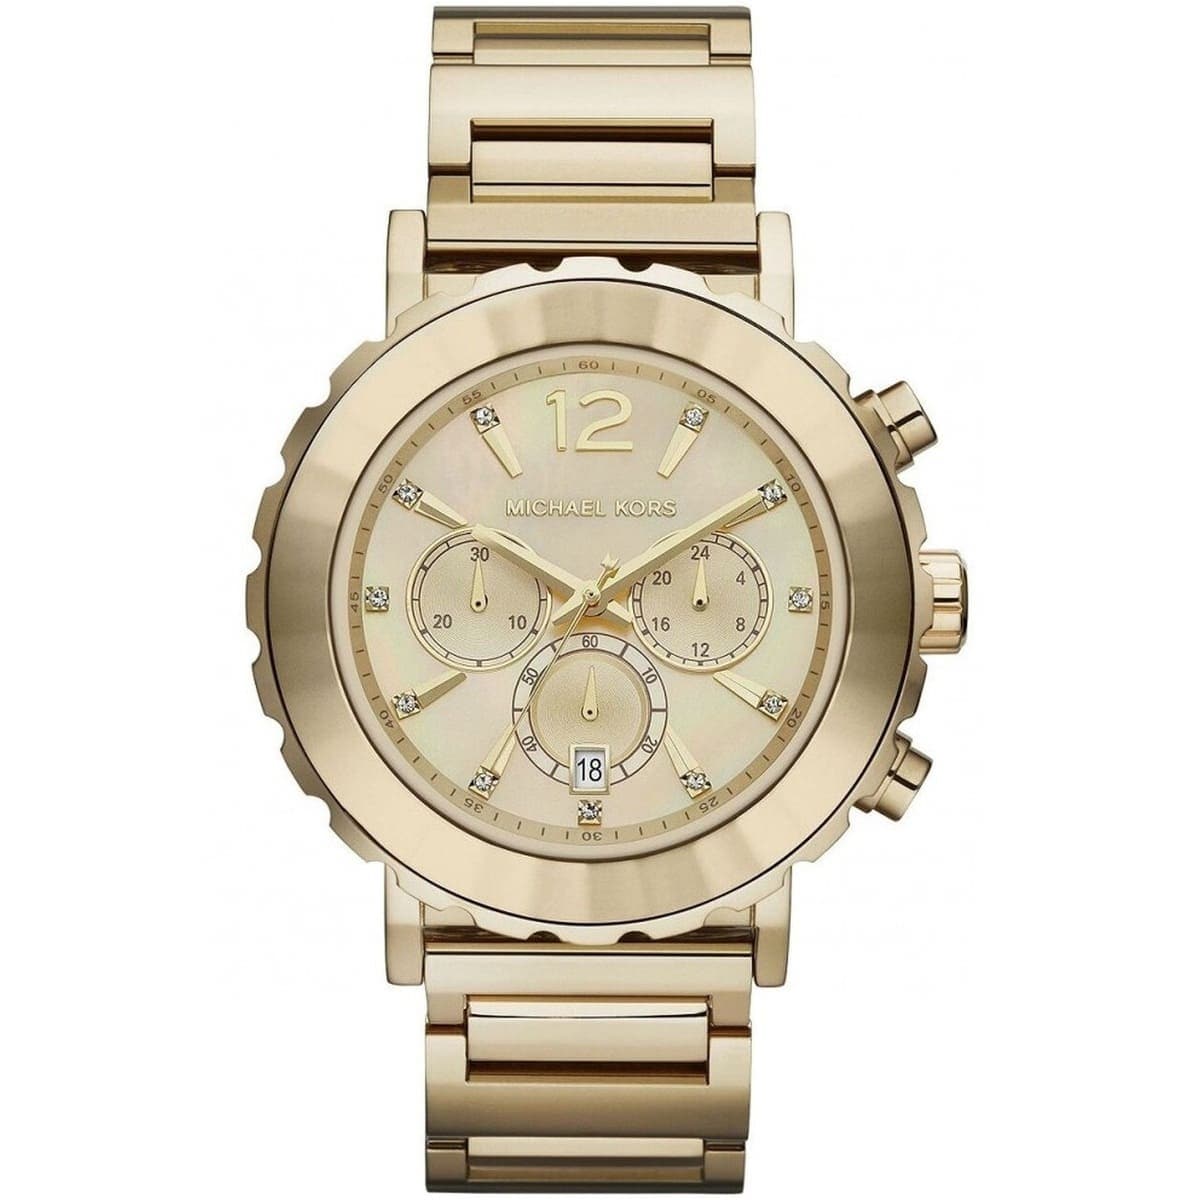 Michael Kors MK6160 Watch – The Watchly